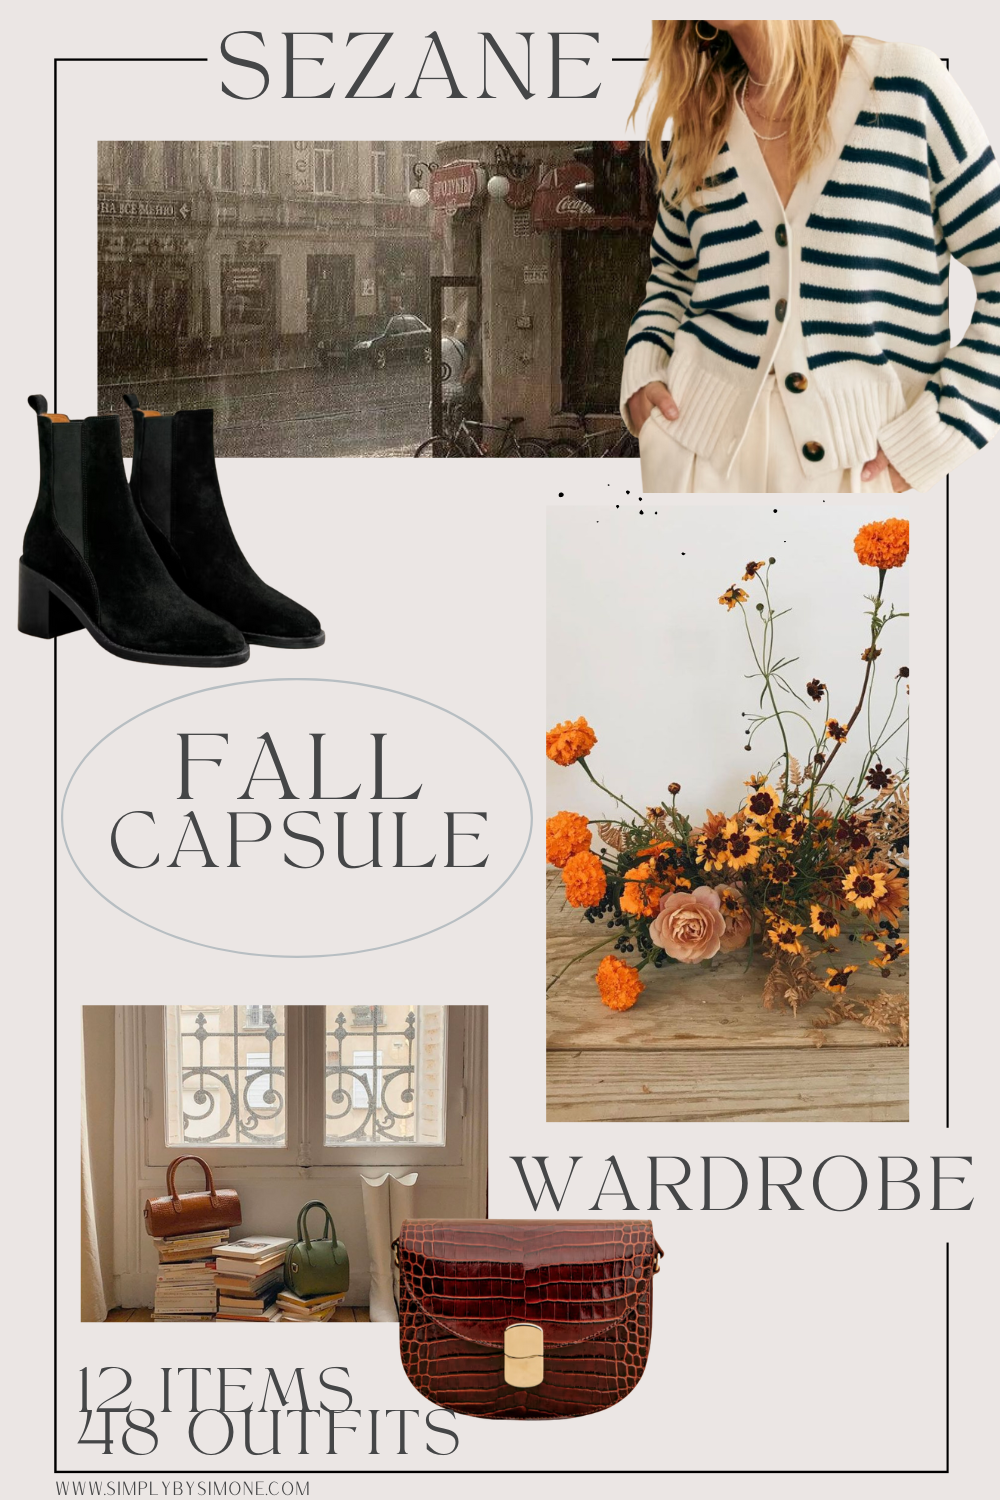 Early Autumn Outfit Ideas